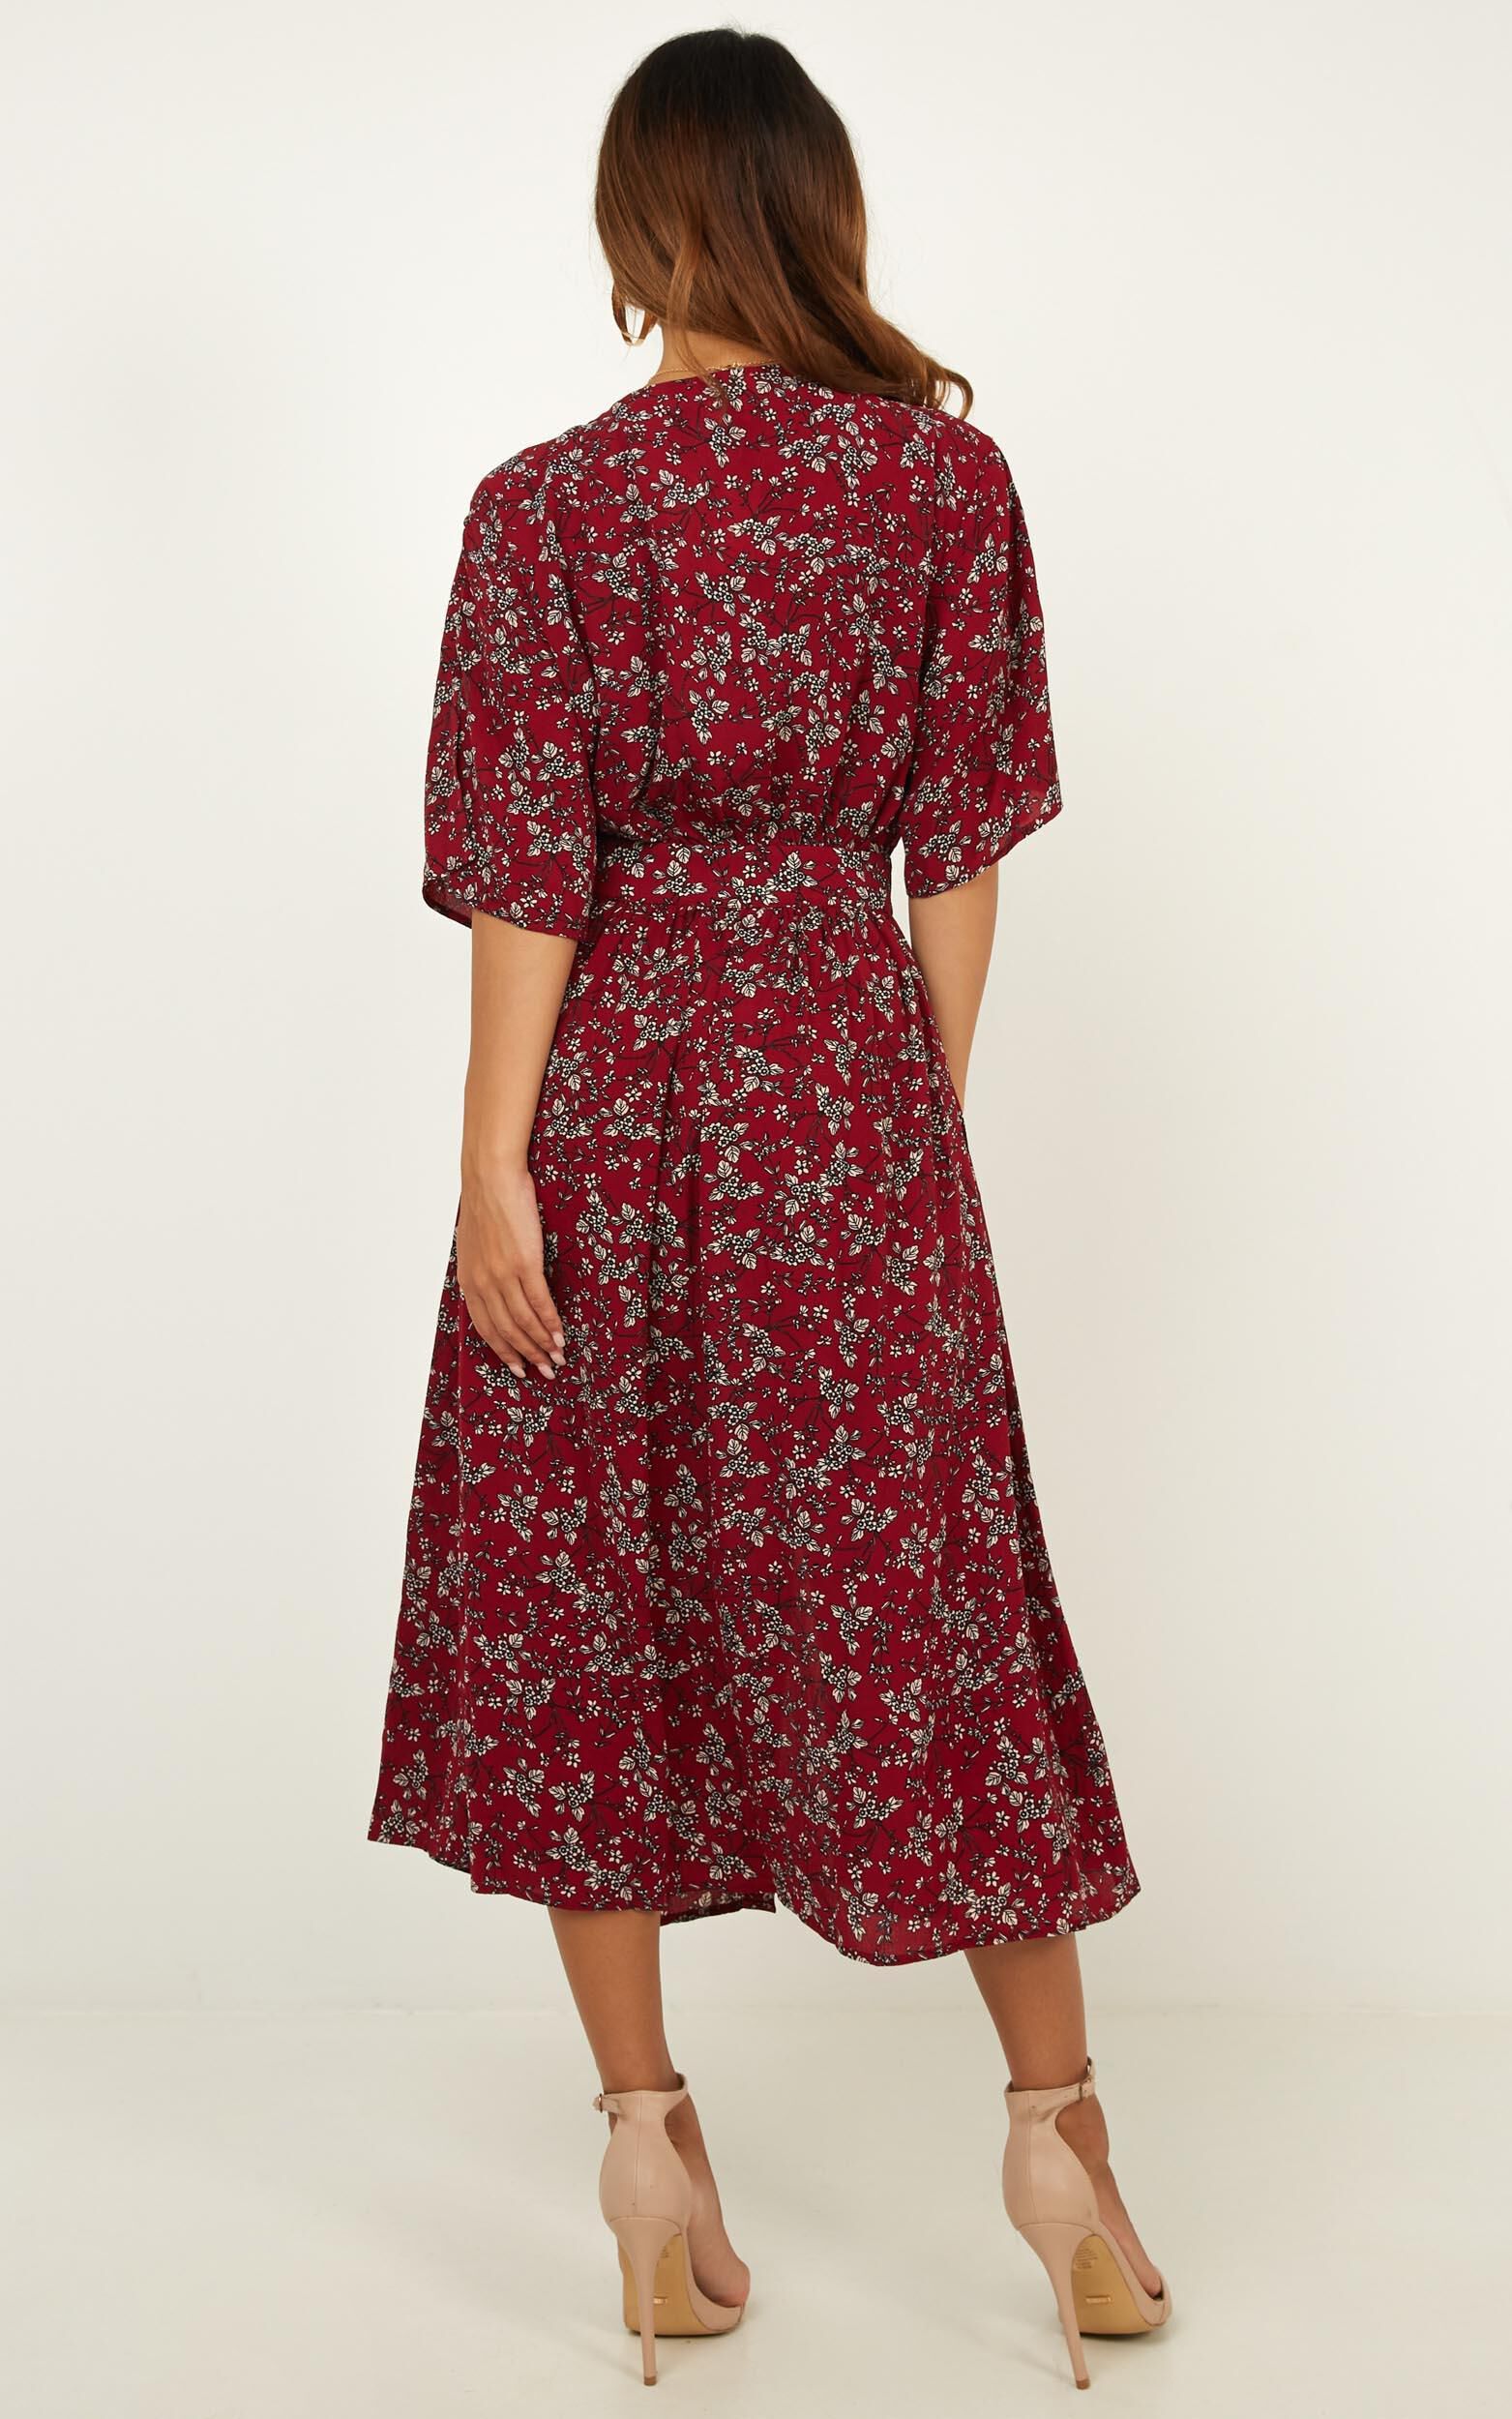 Inner Circle Only Dress In Wine Floral | Showpo USA